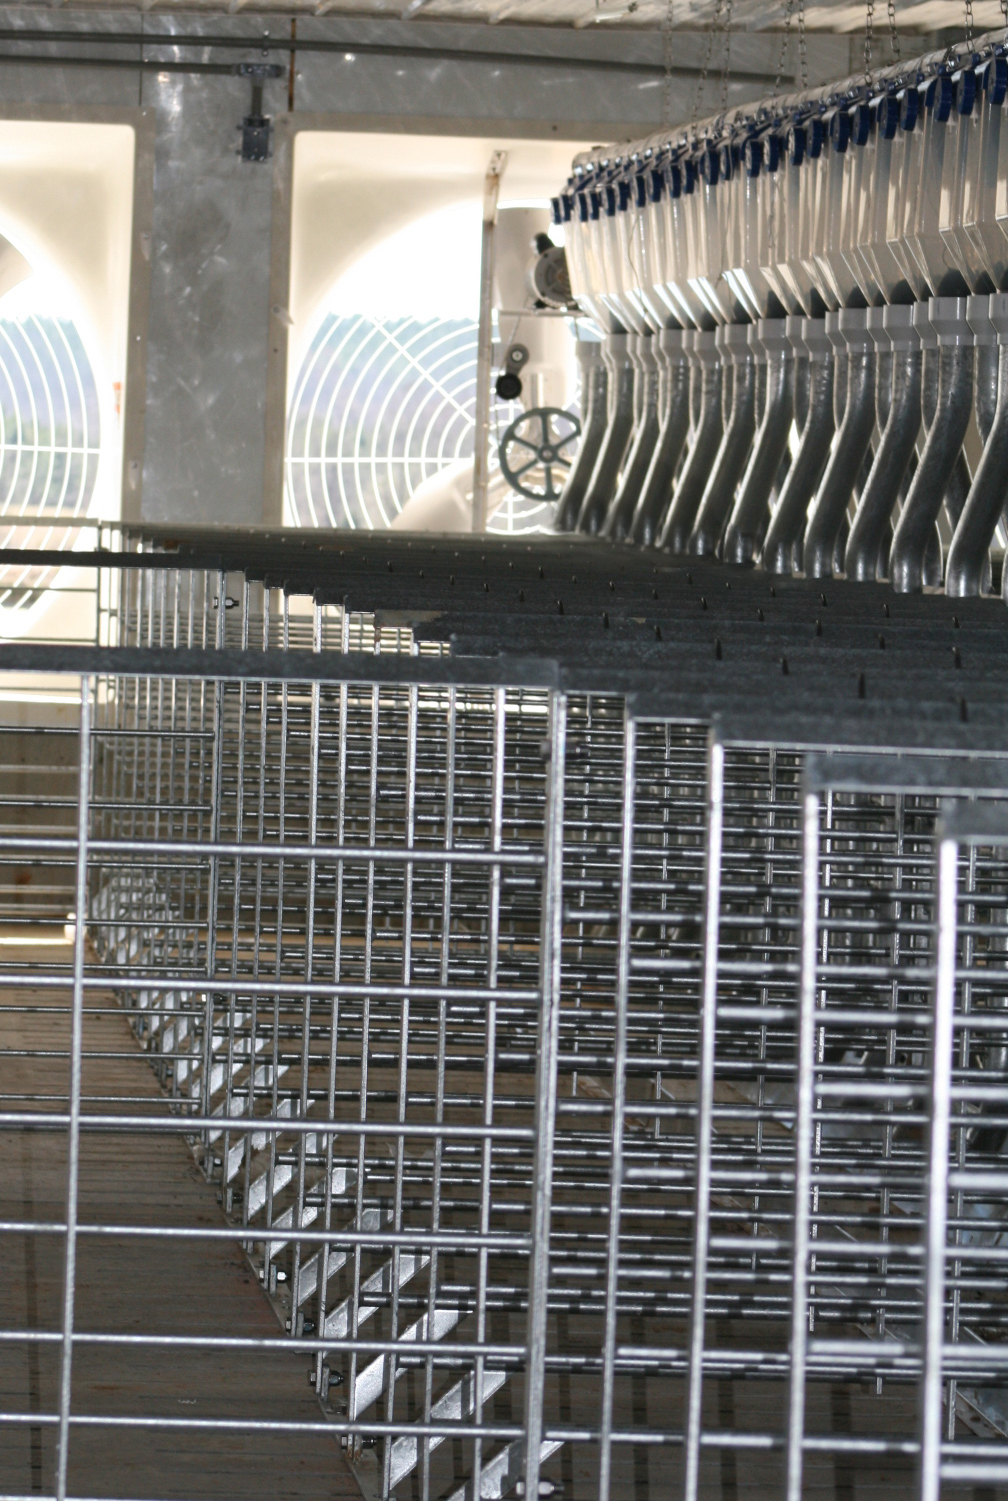 Hog Slat stanchions for group sow housing are designed to be bolted together during assembly. Our bolt-together installation process uses pre-punched floor and top-bar straps that ensure squared equipment with proper spacing, alignment and fit.